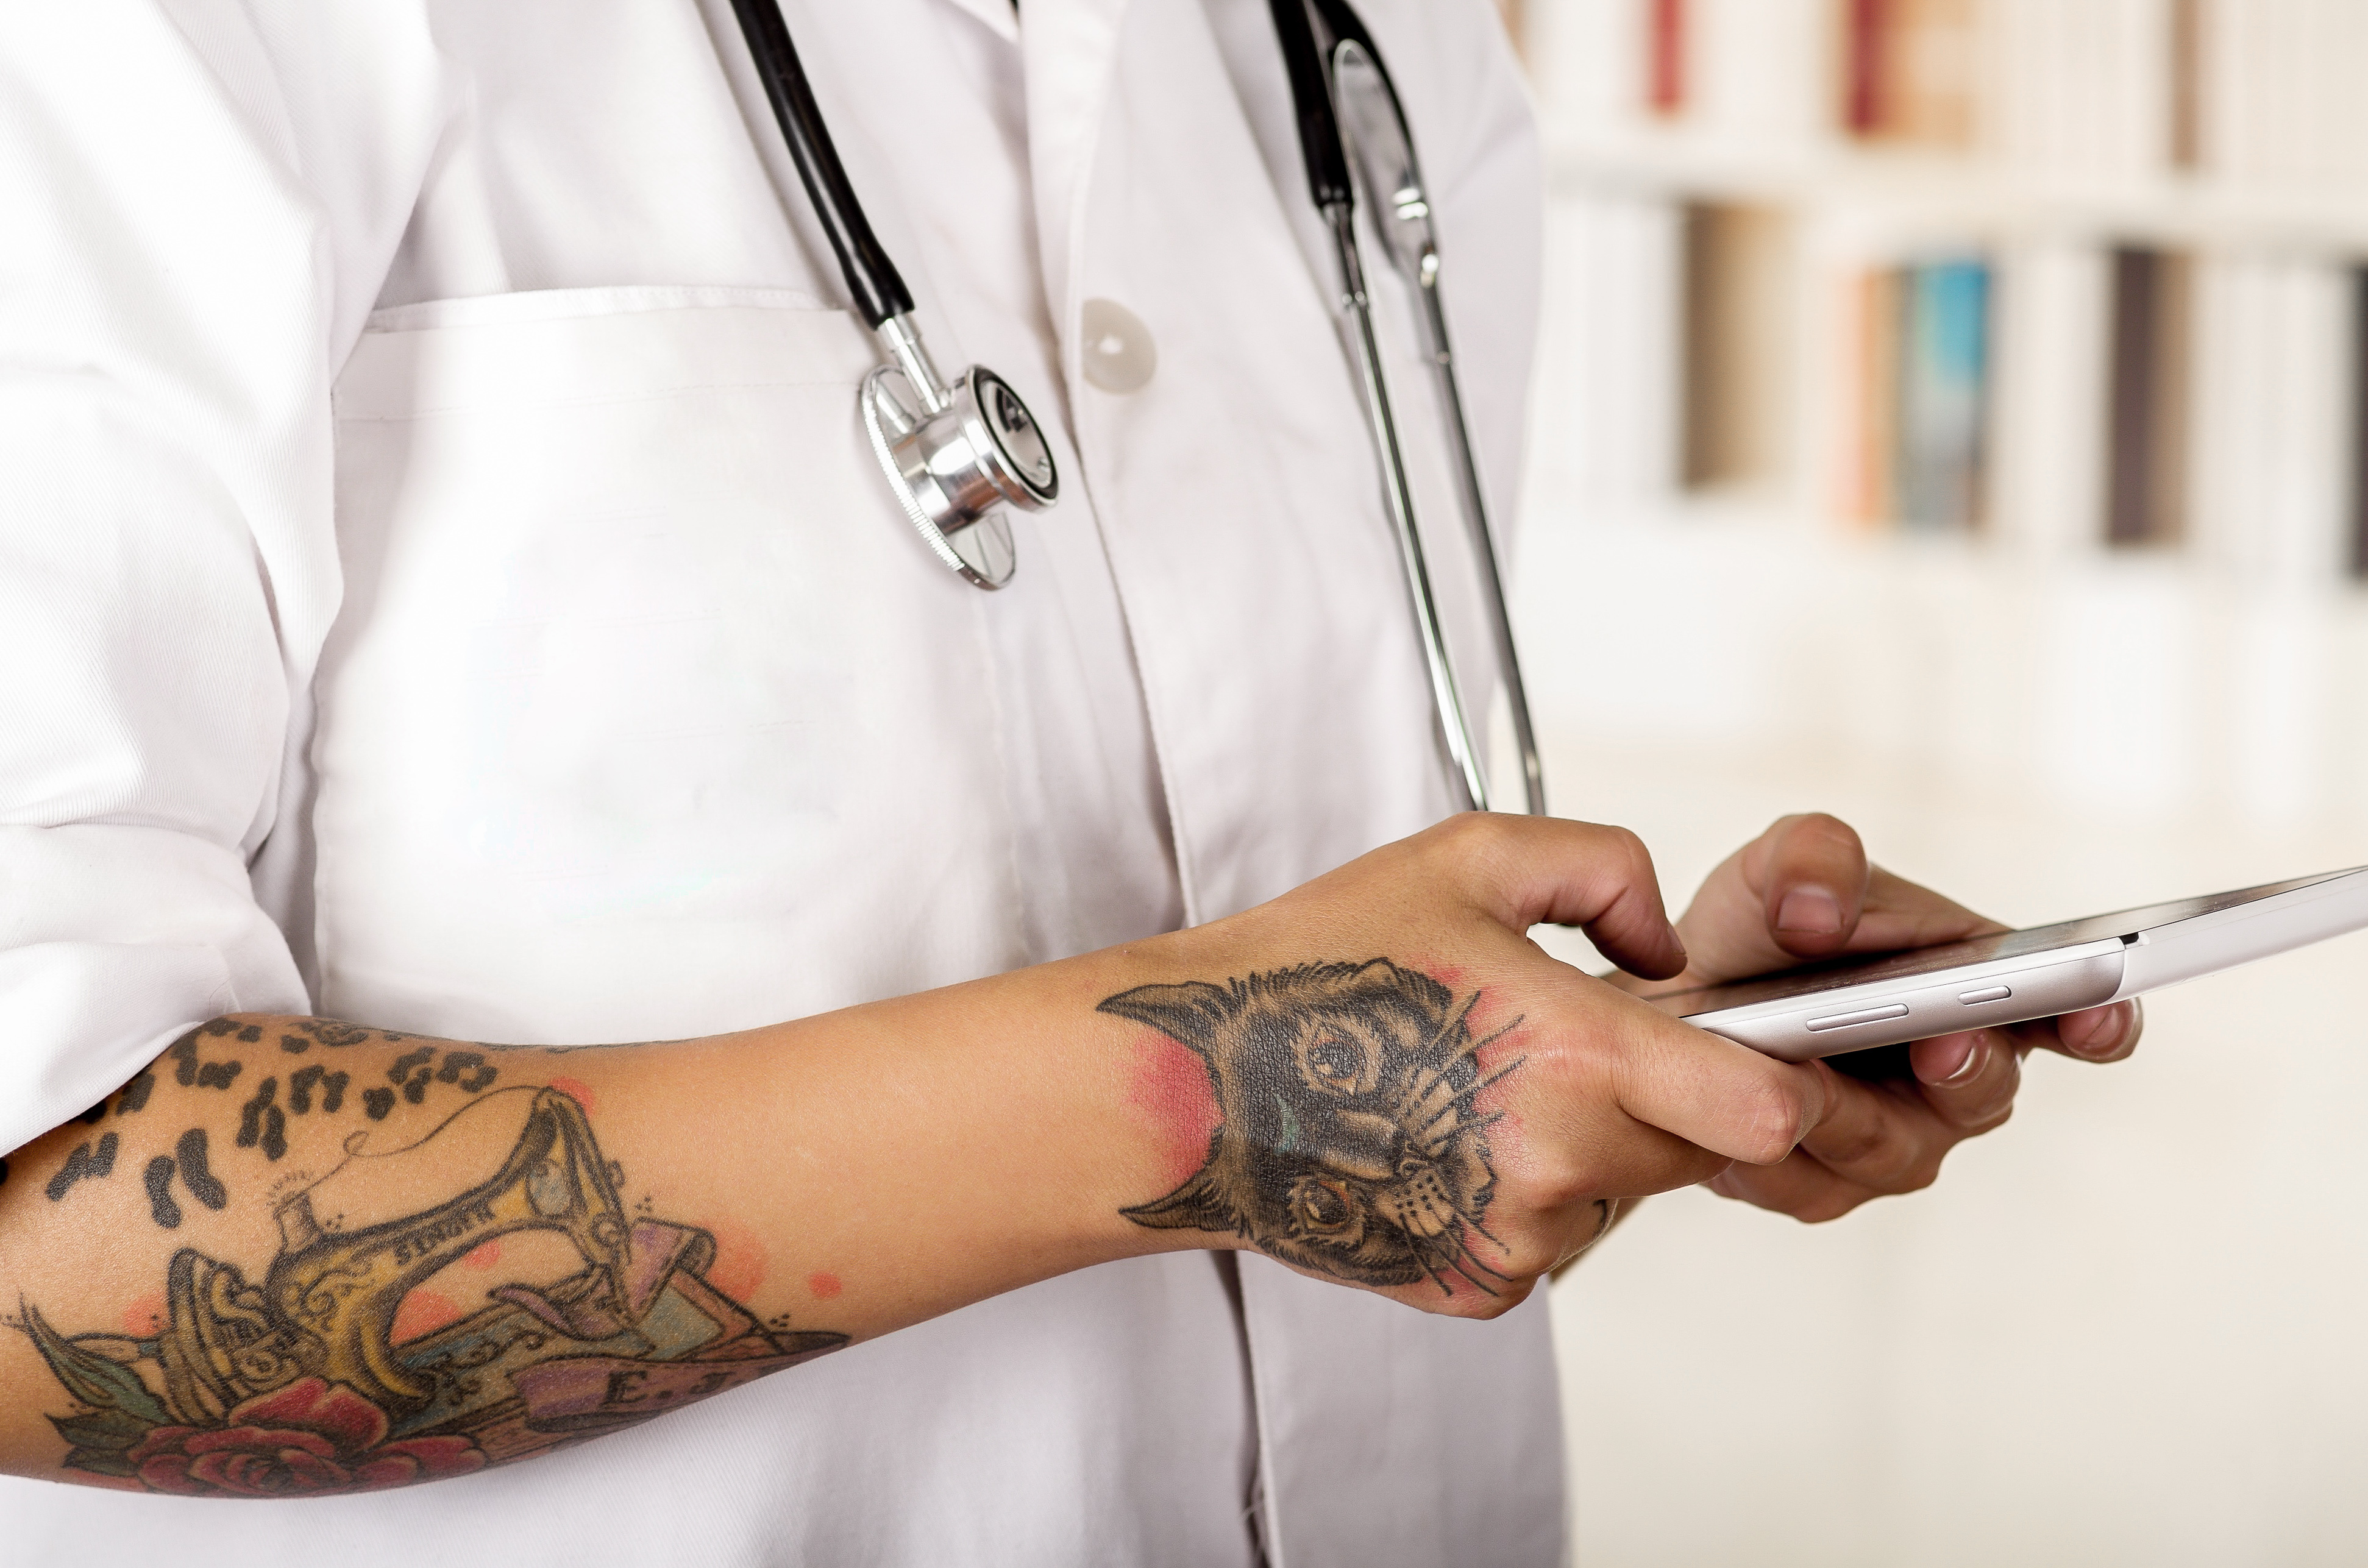 Physicians and Flesh: Should Doctors Have Tattoos?